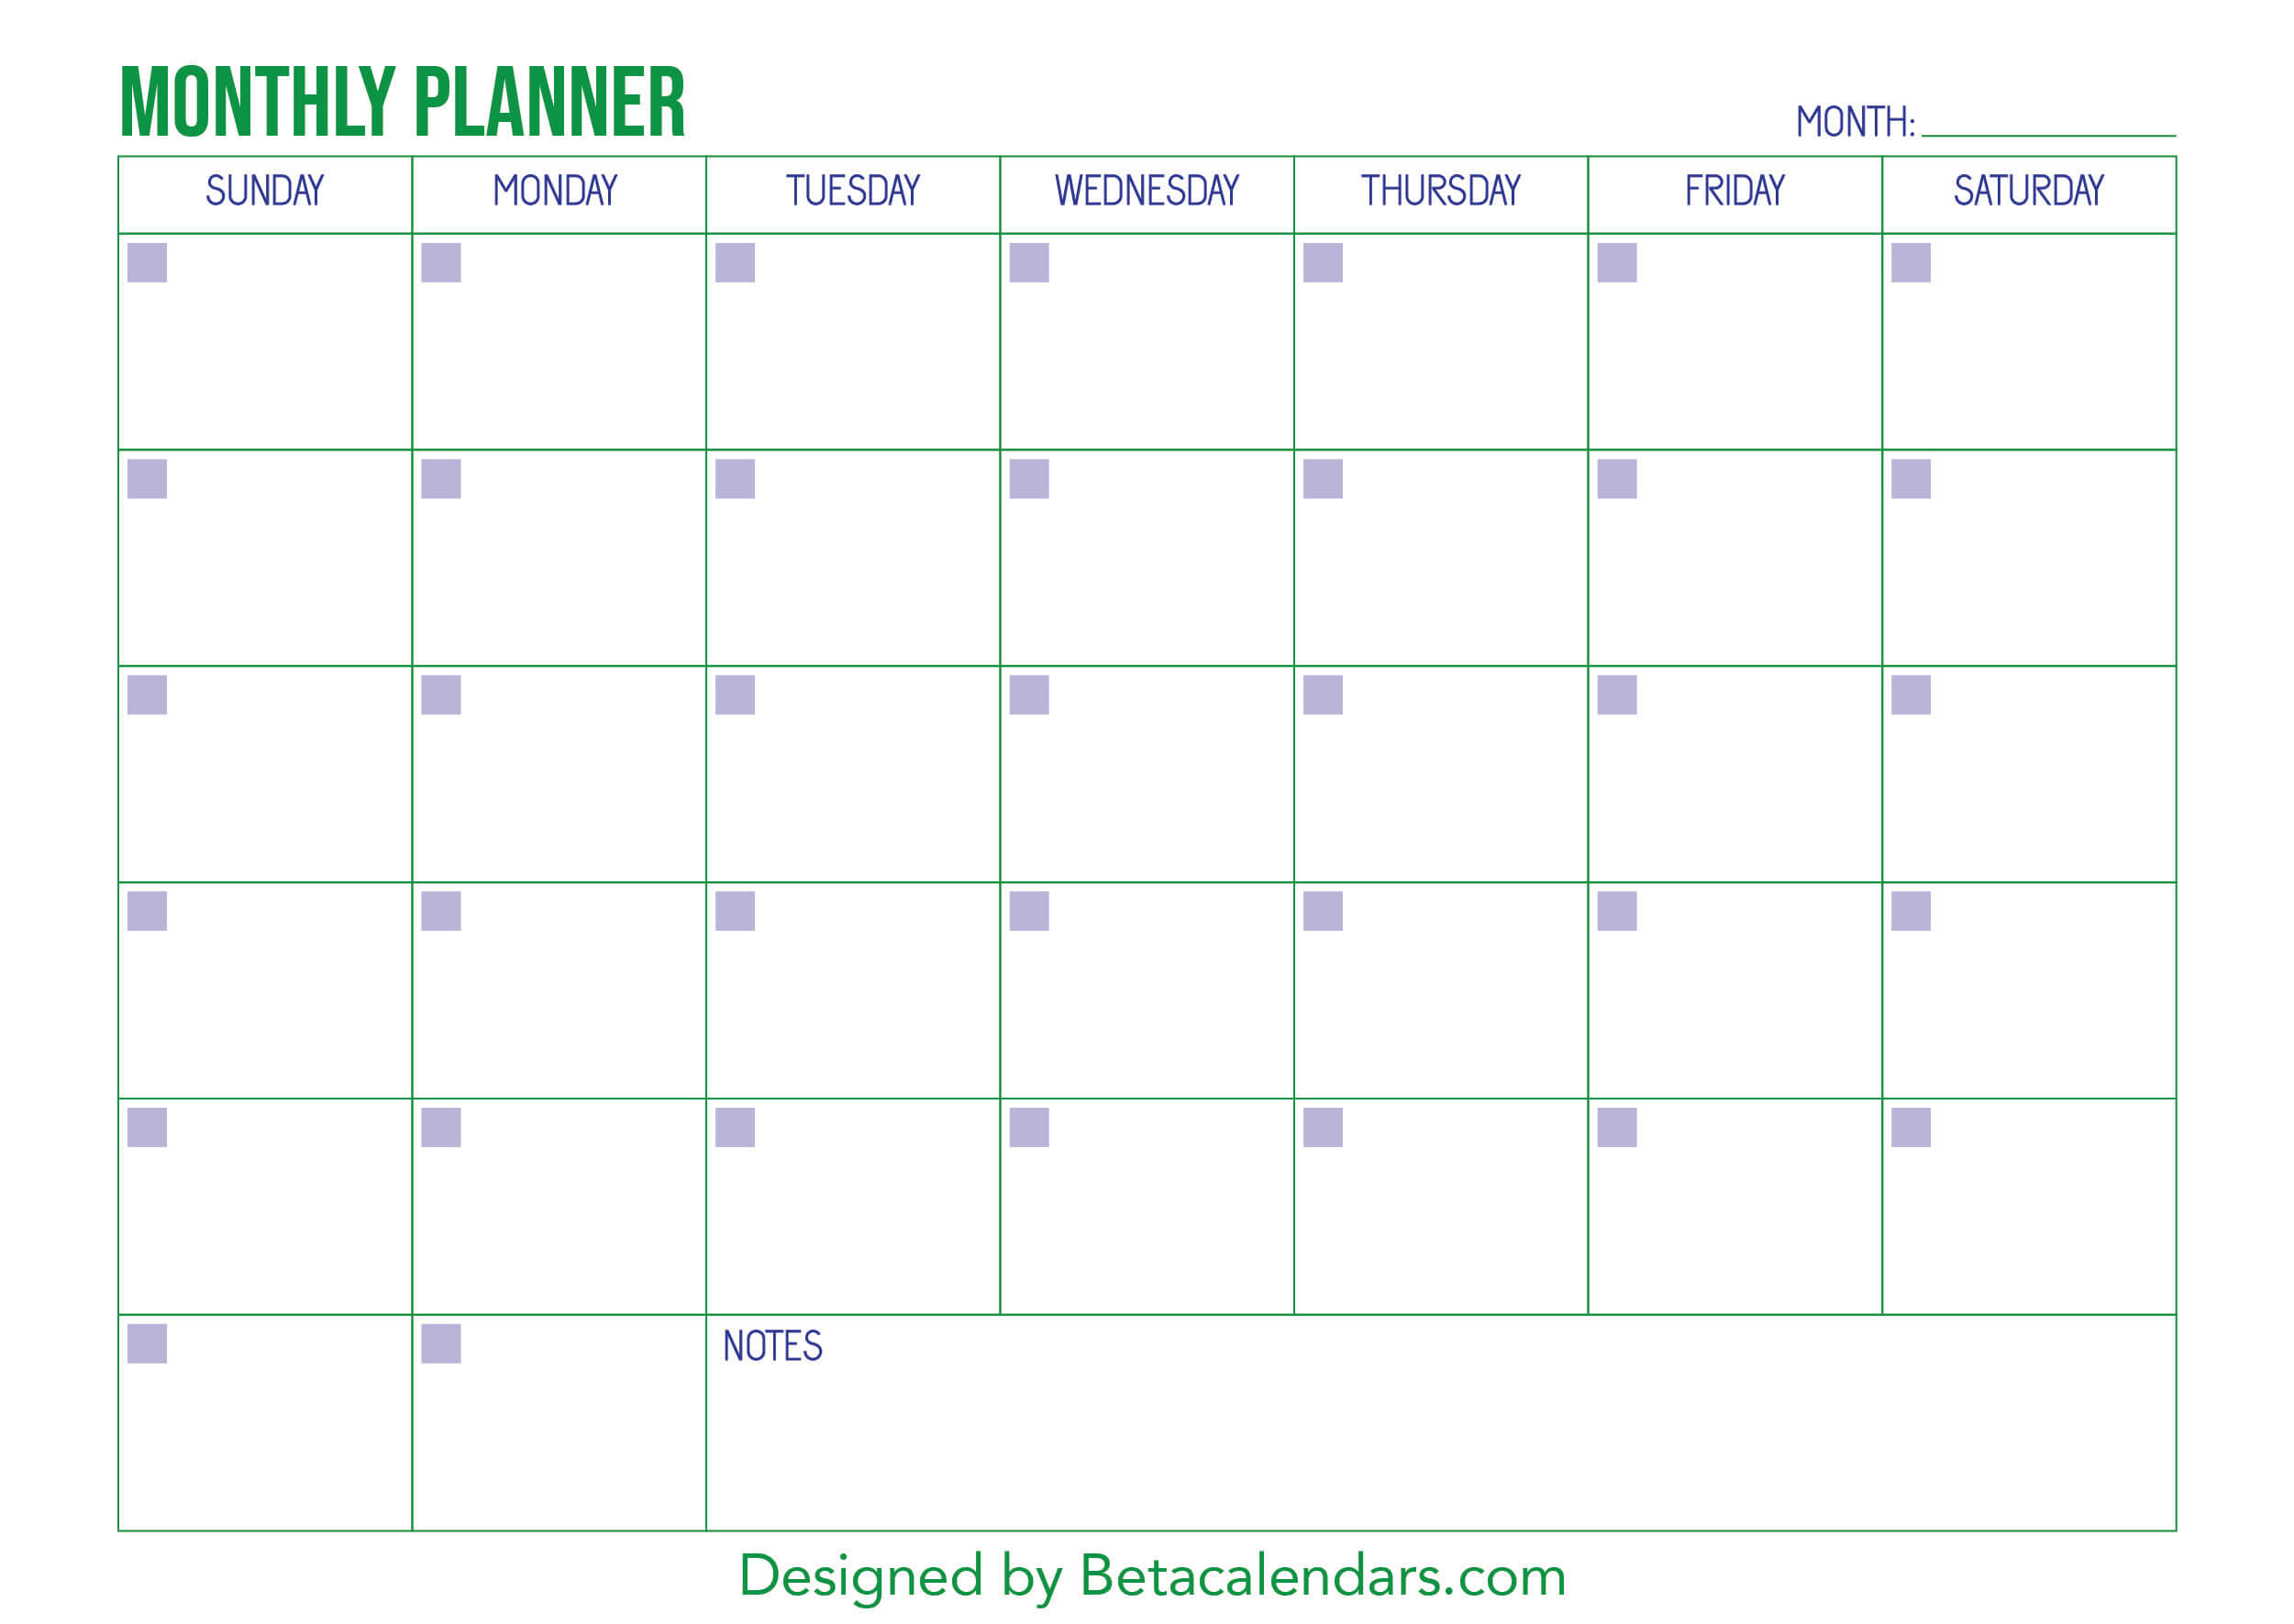 free-printable-monthly-planner-templates